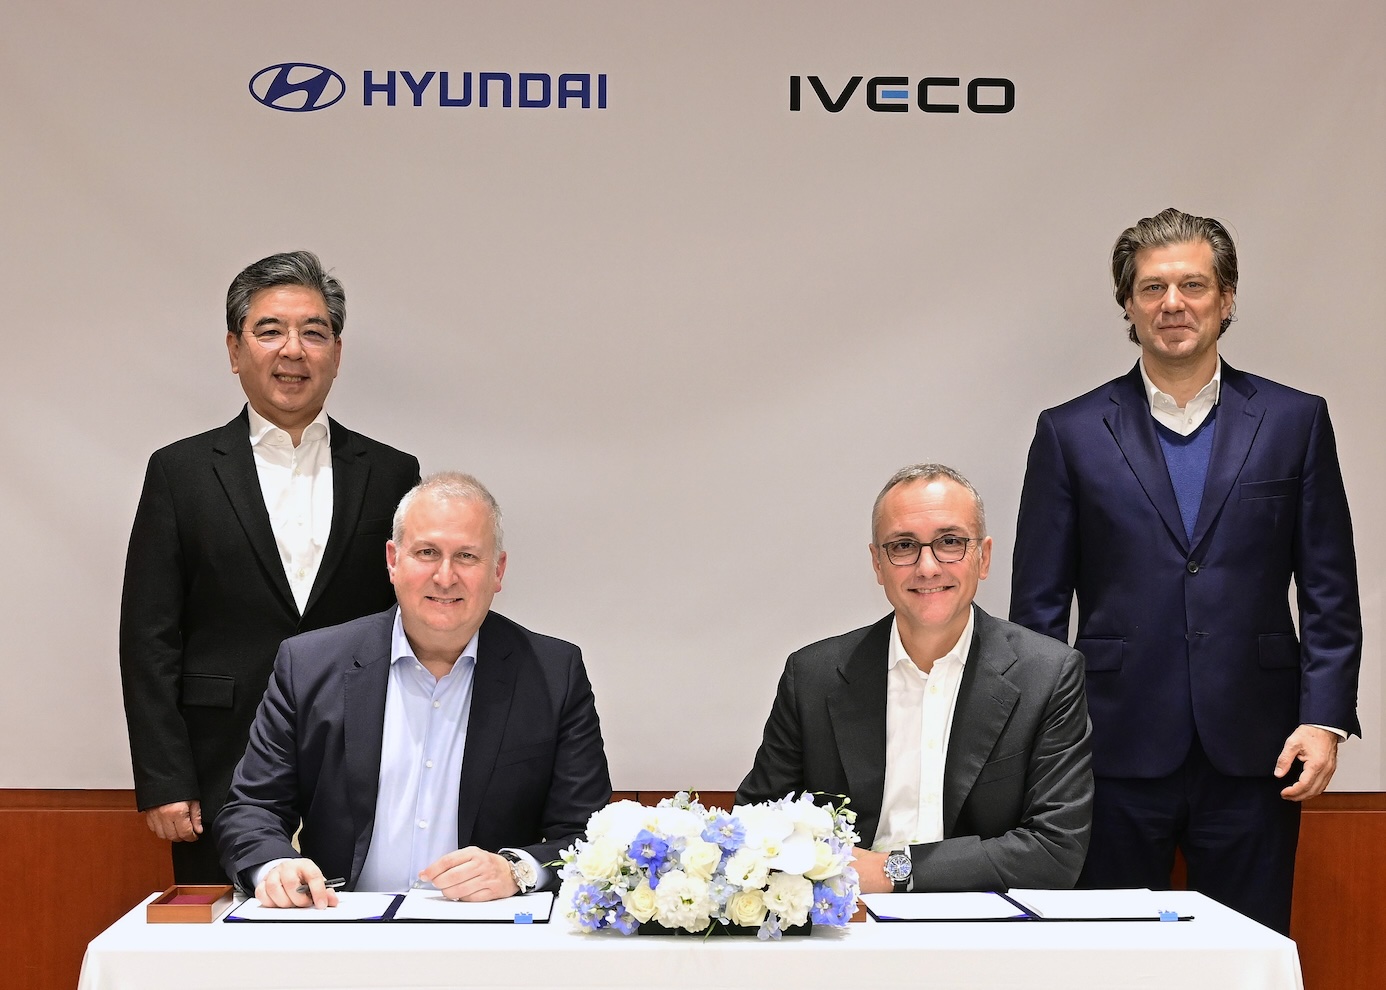 Hyundai supplies an electric light commercial vehicle to Iveco Group